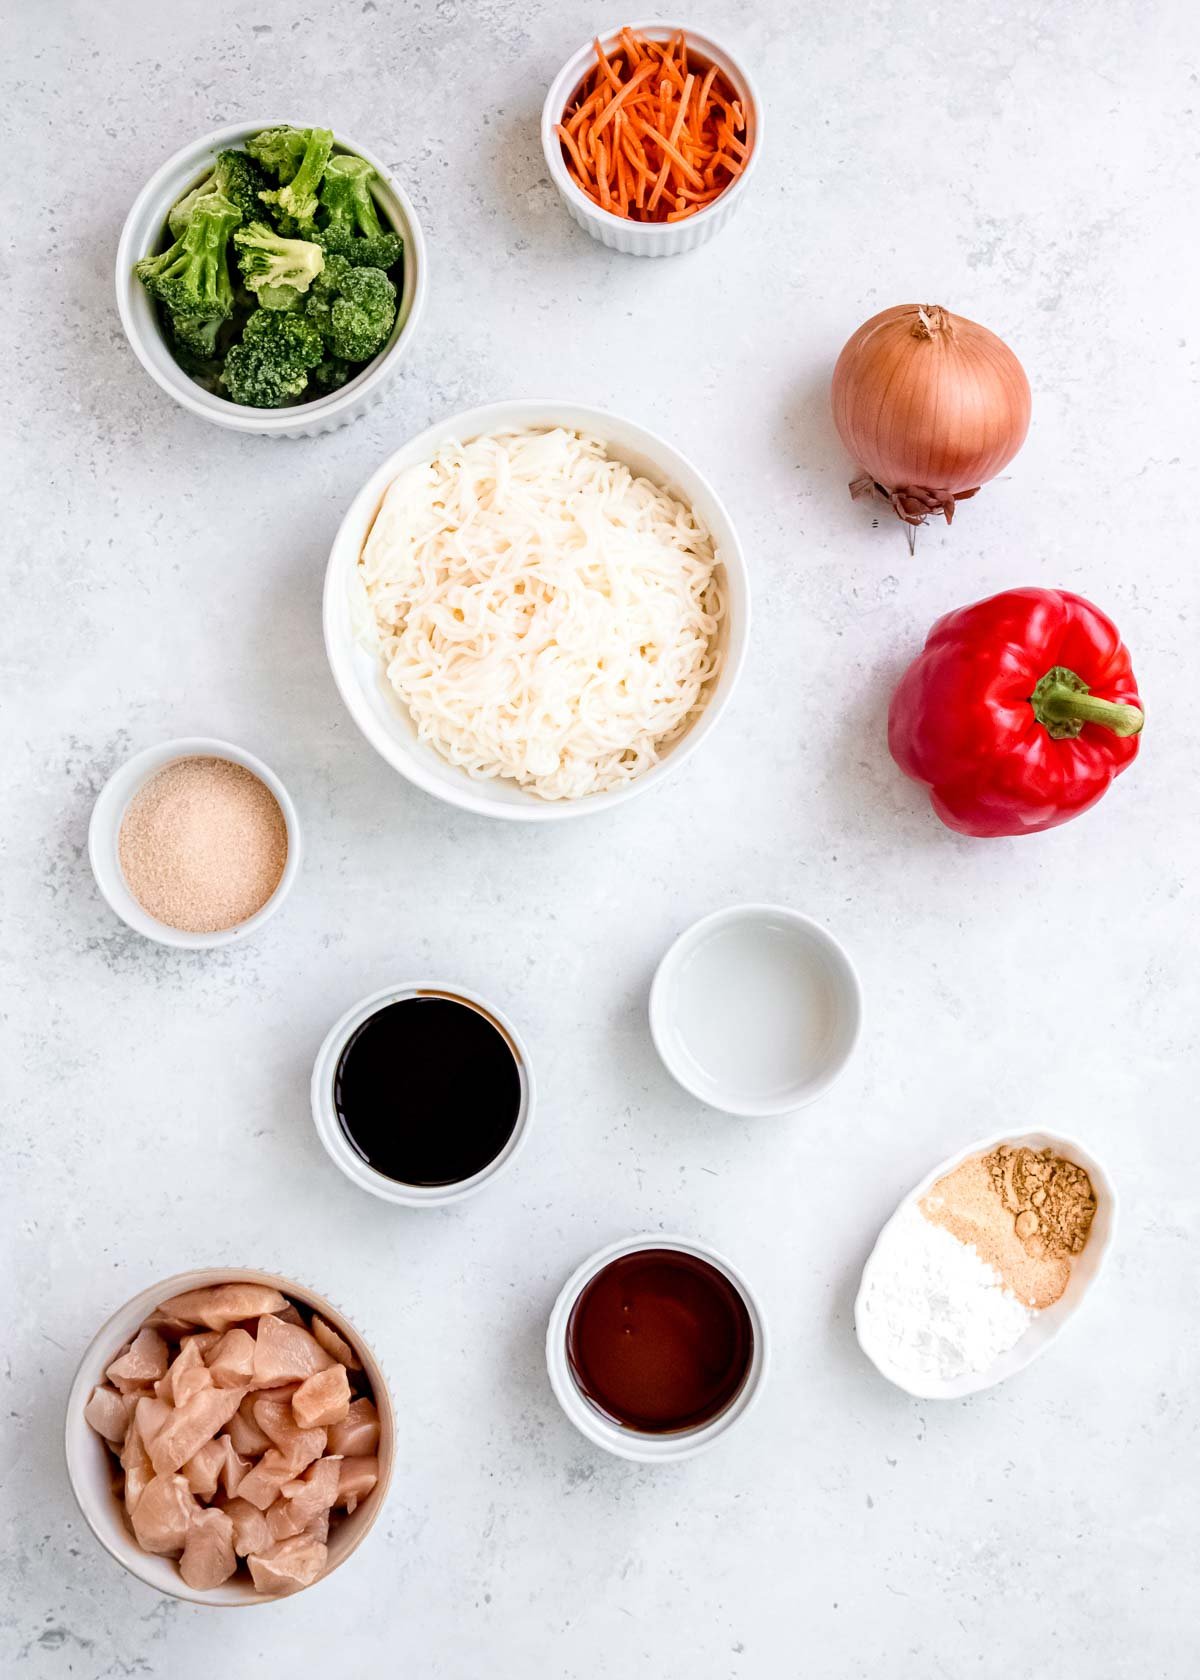 all ingredients needed for shirataki stir fry on a white background